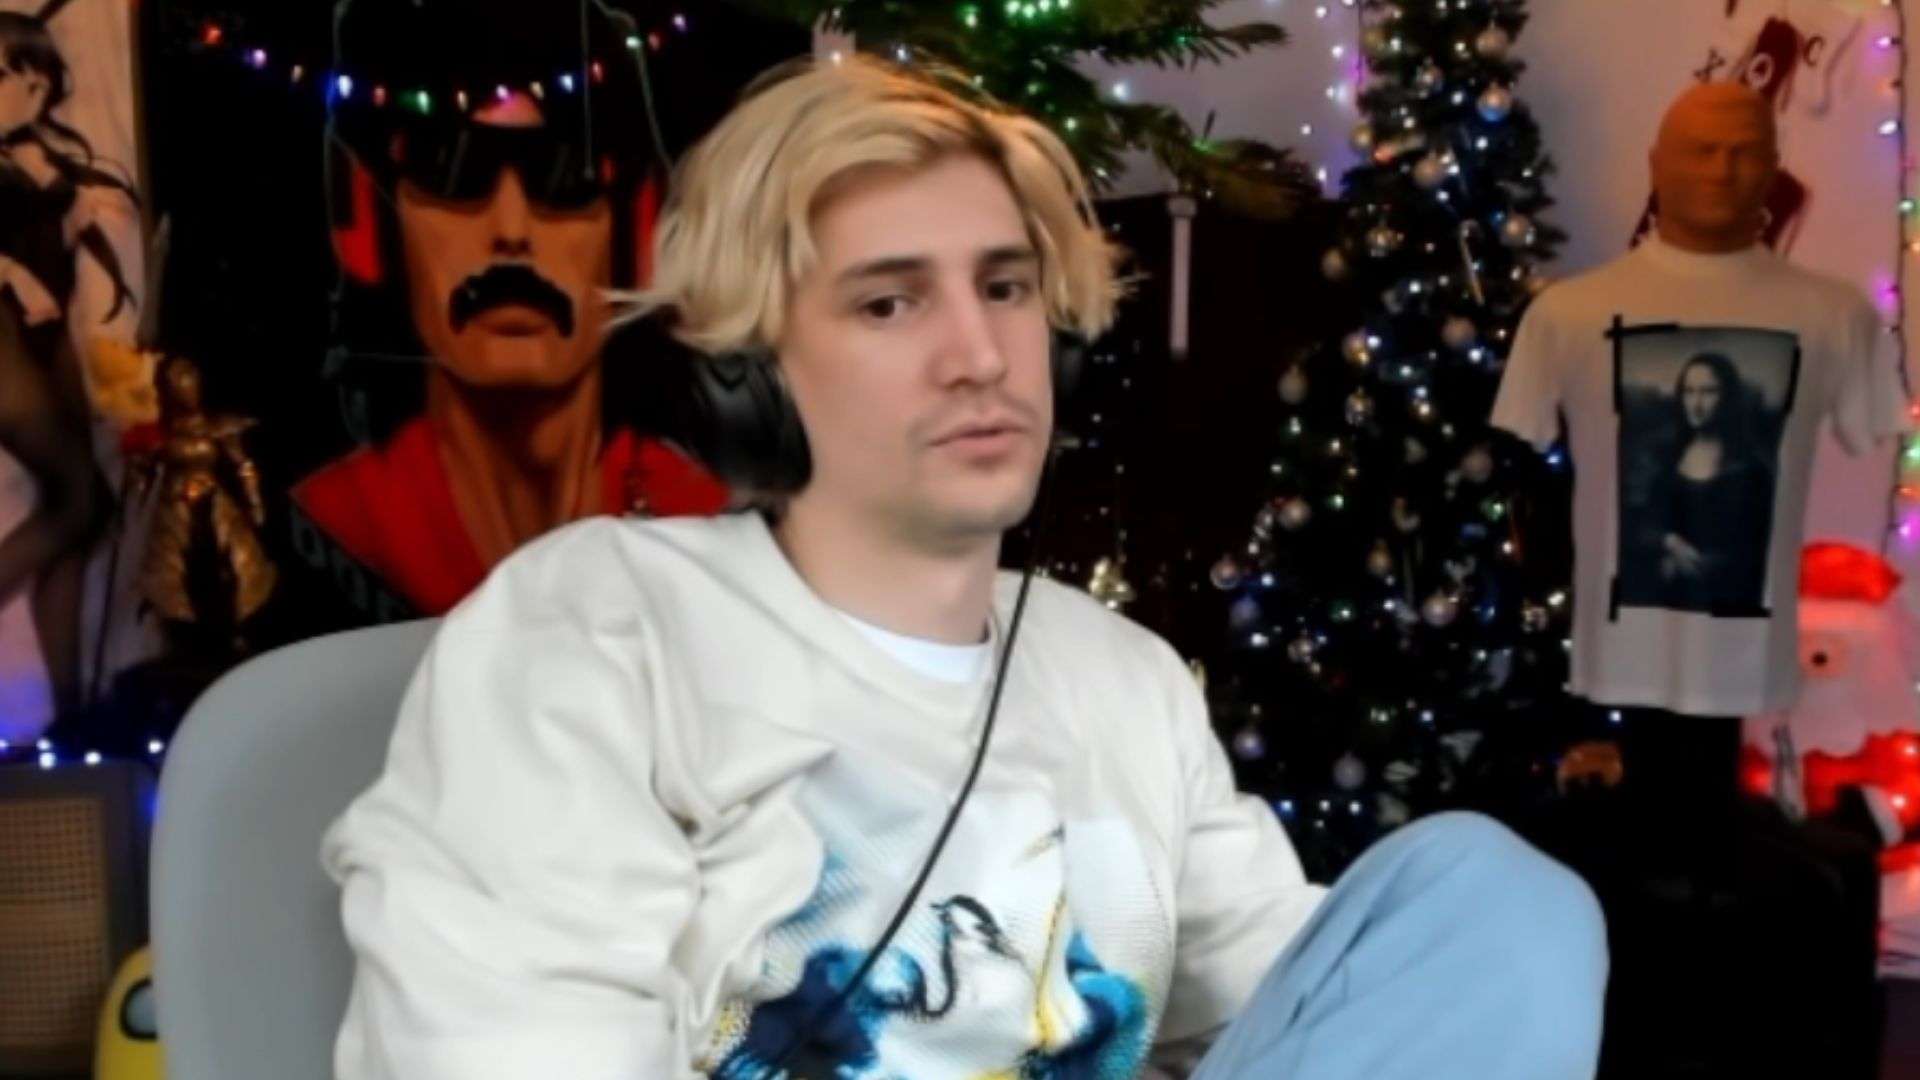 xQc looking at camera in white shirt and blue pants